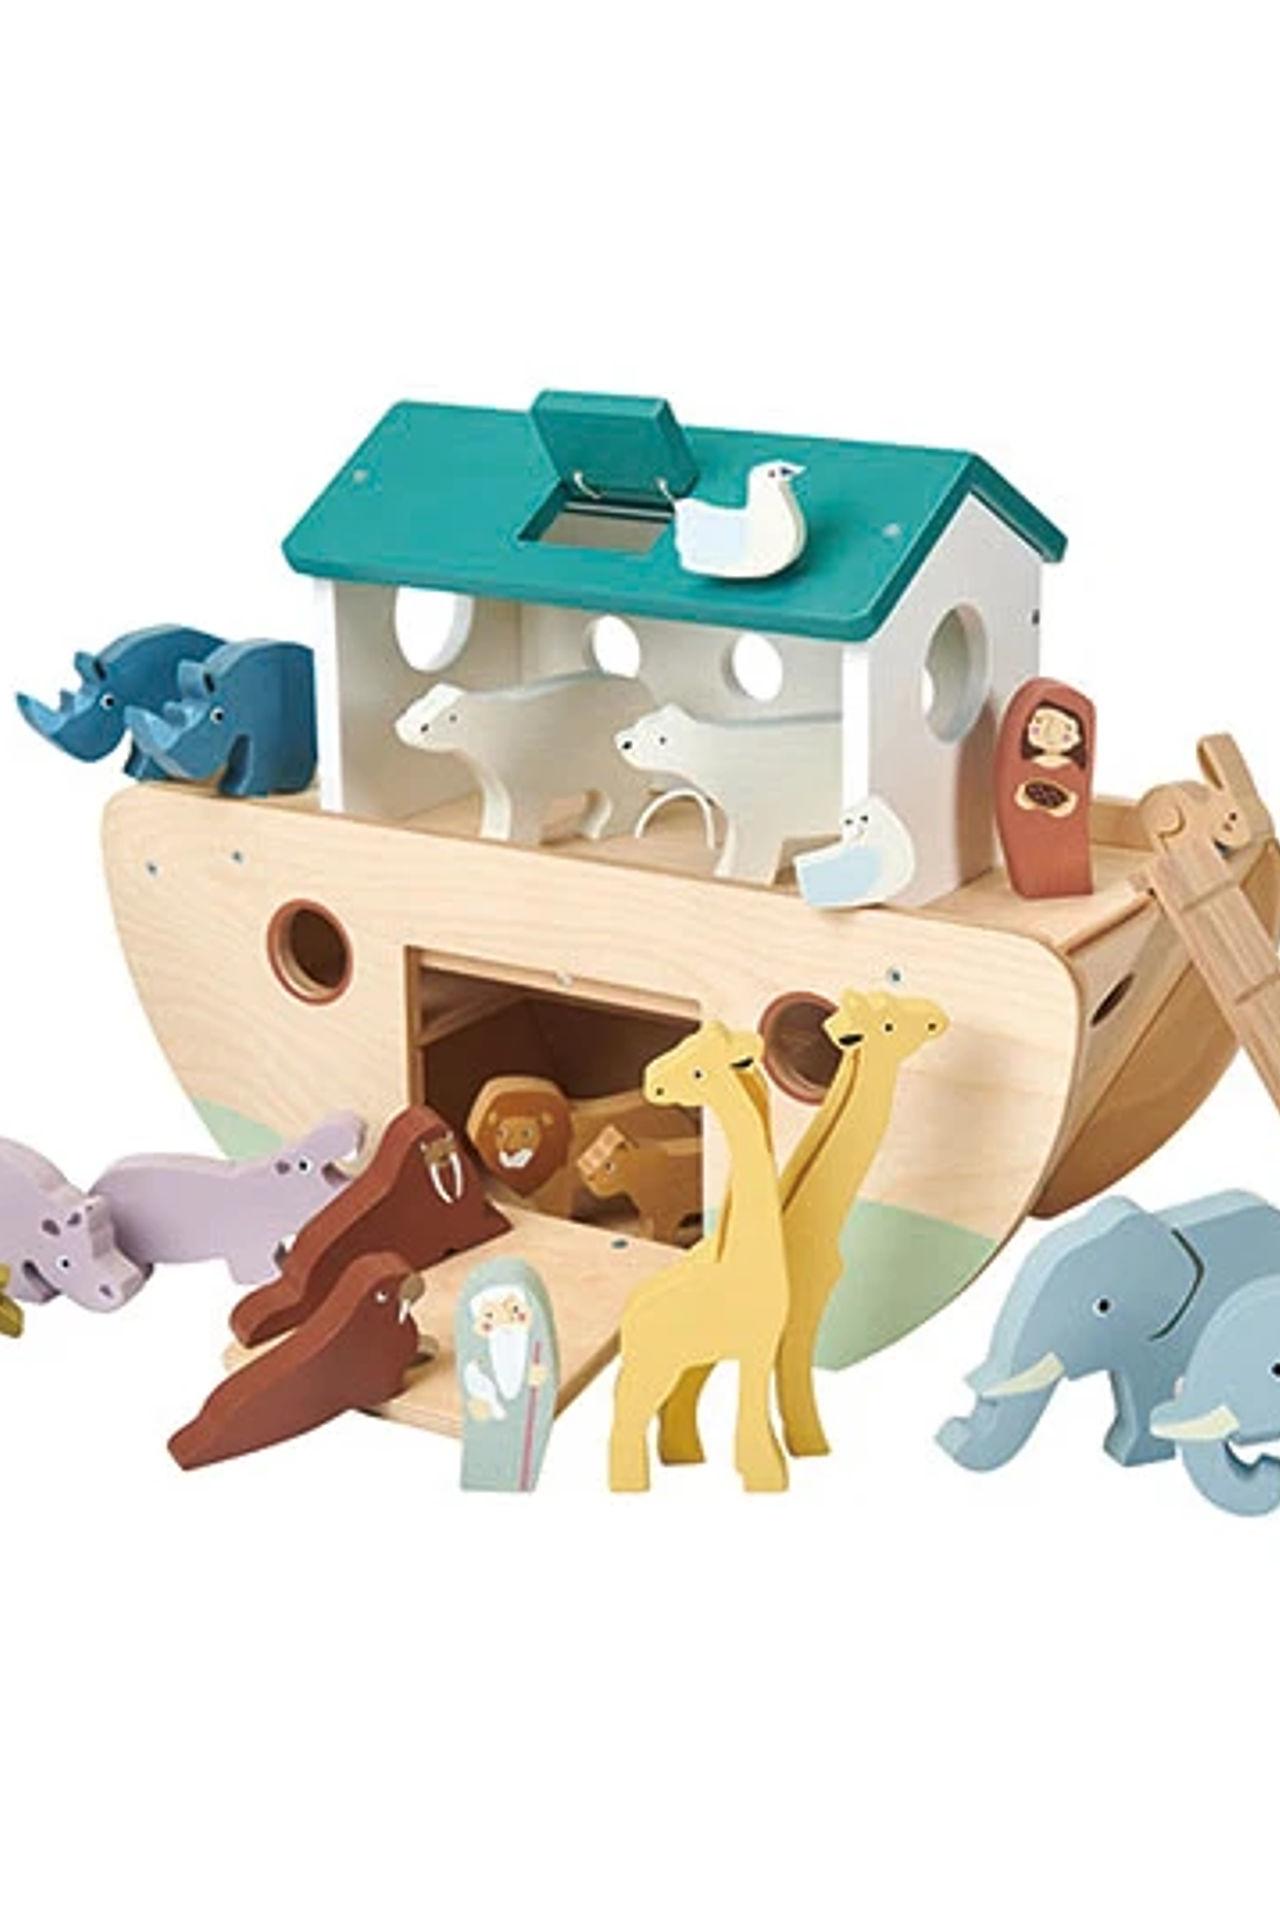 New Noah's Ark with 10 Pairs of Wooden Animals #3